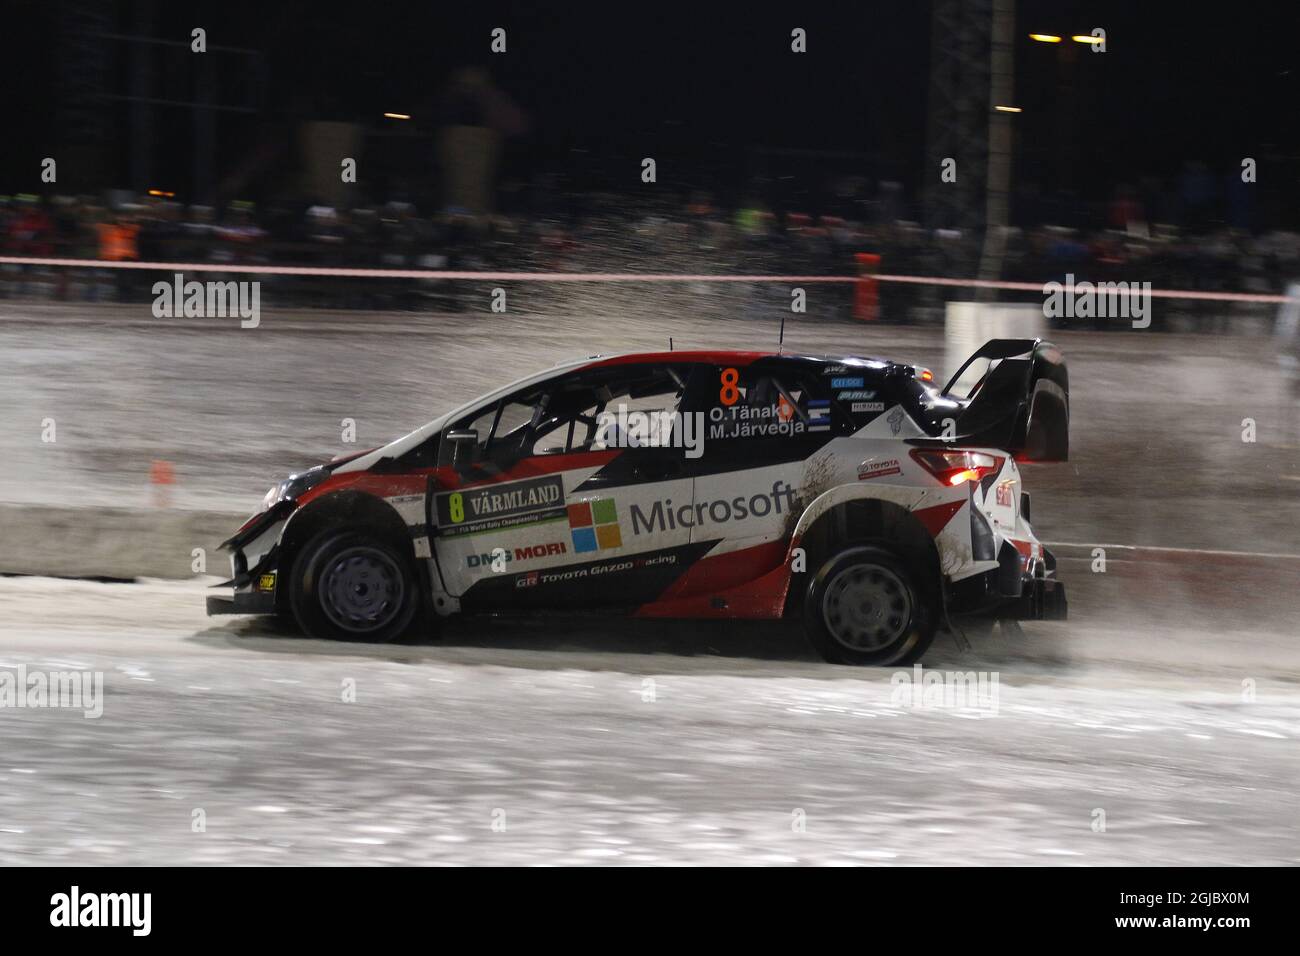 Ott Tanak and Martin Jarveoja of Estonia in their Toyota Yaris WRC during day 1 of the second round of the FIA World Rally Championship, Rally Sweden 2019, in Karlstad, Sweden, 14 February 2019. Photo: Micke Fransson/TT/Kod 61460 Stock Photo